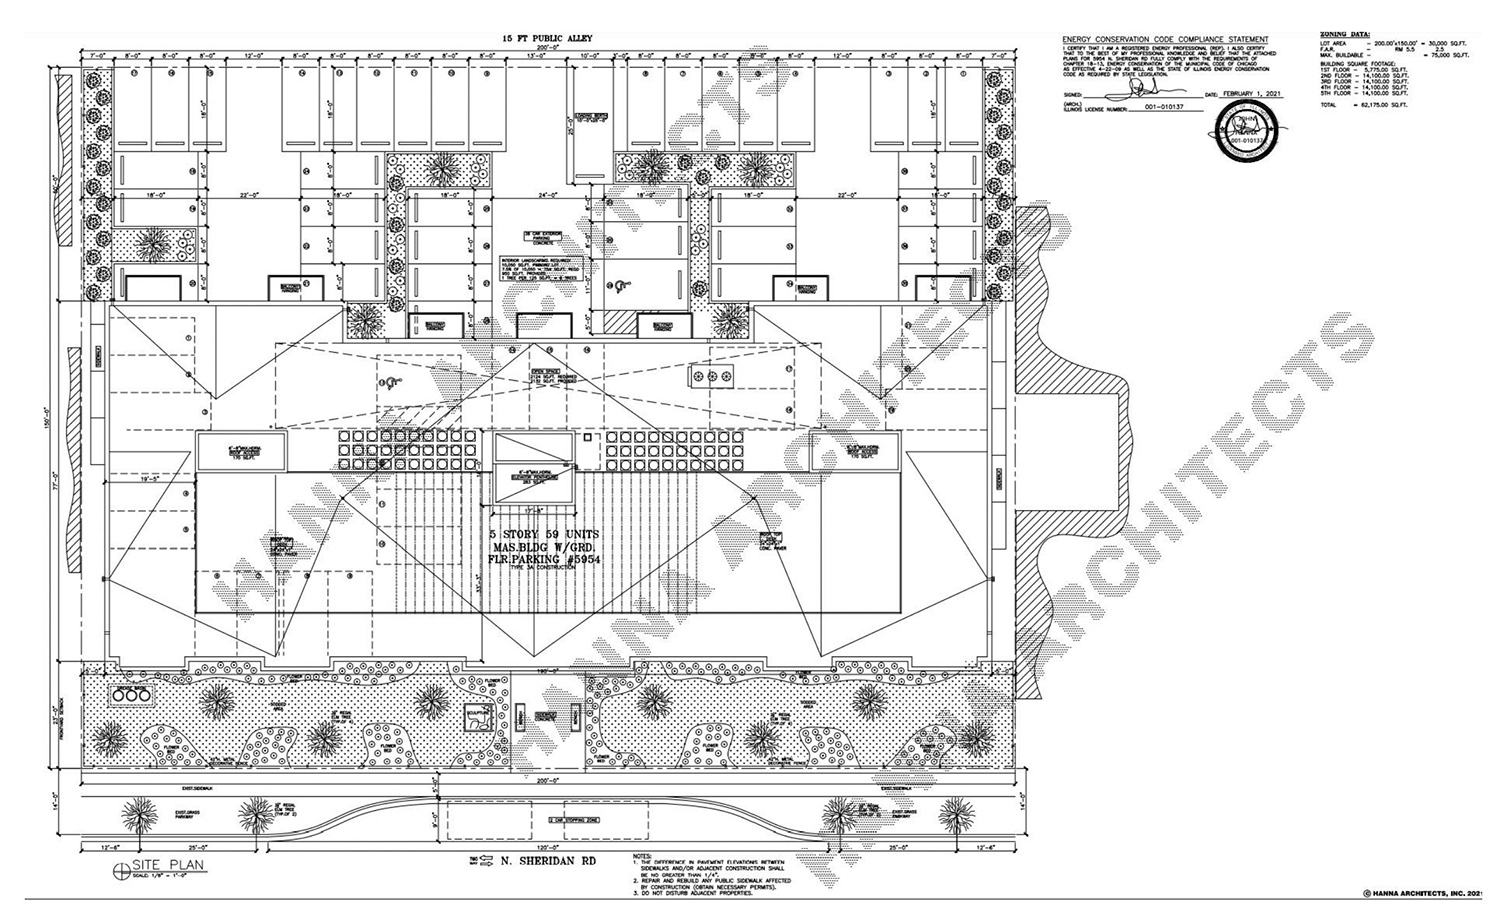 Site Plan for 5950 N Sheridan Road. Drawing by Hanna Architects